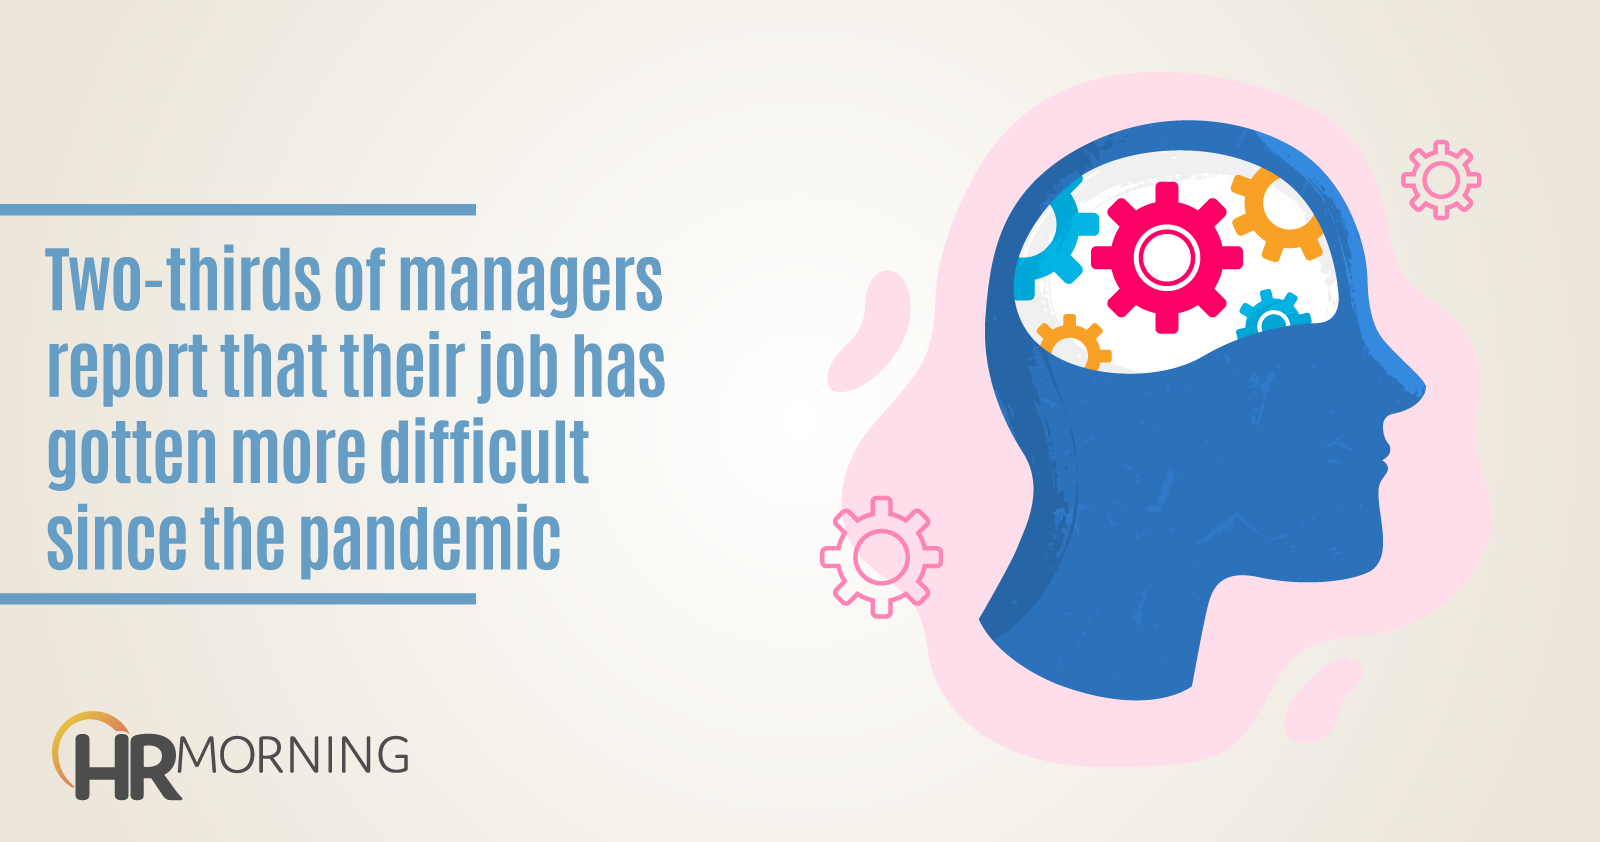 Two-thirds of managers report that their job has gotten more difficult since the pandemic